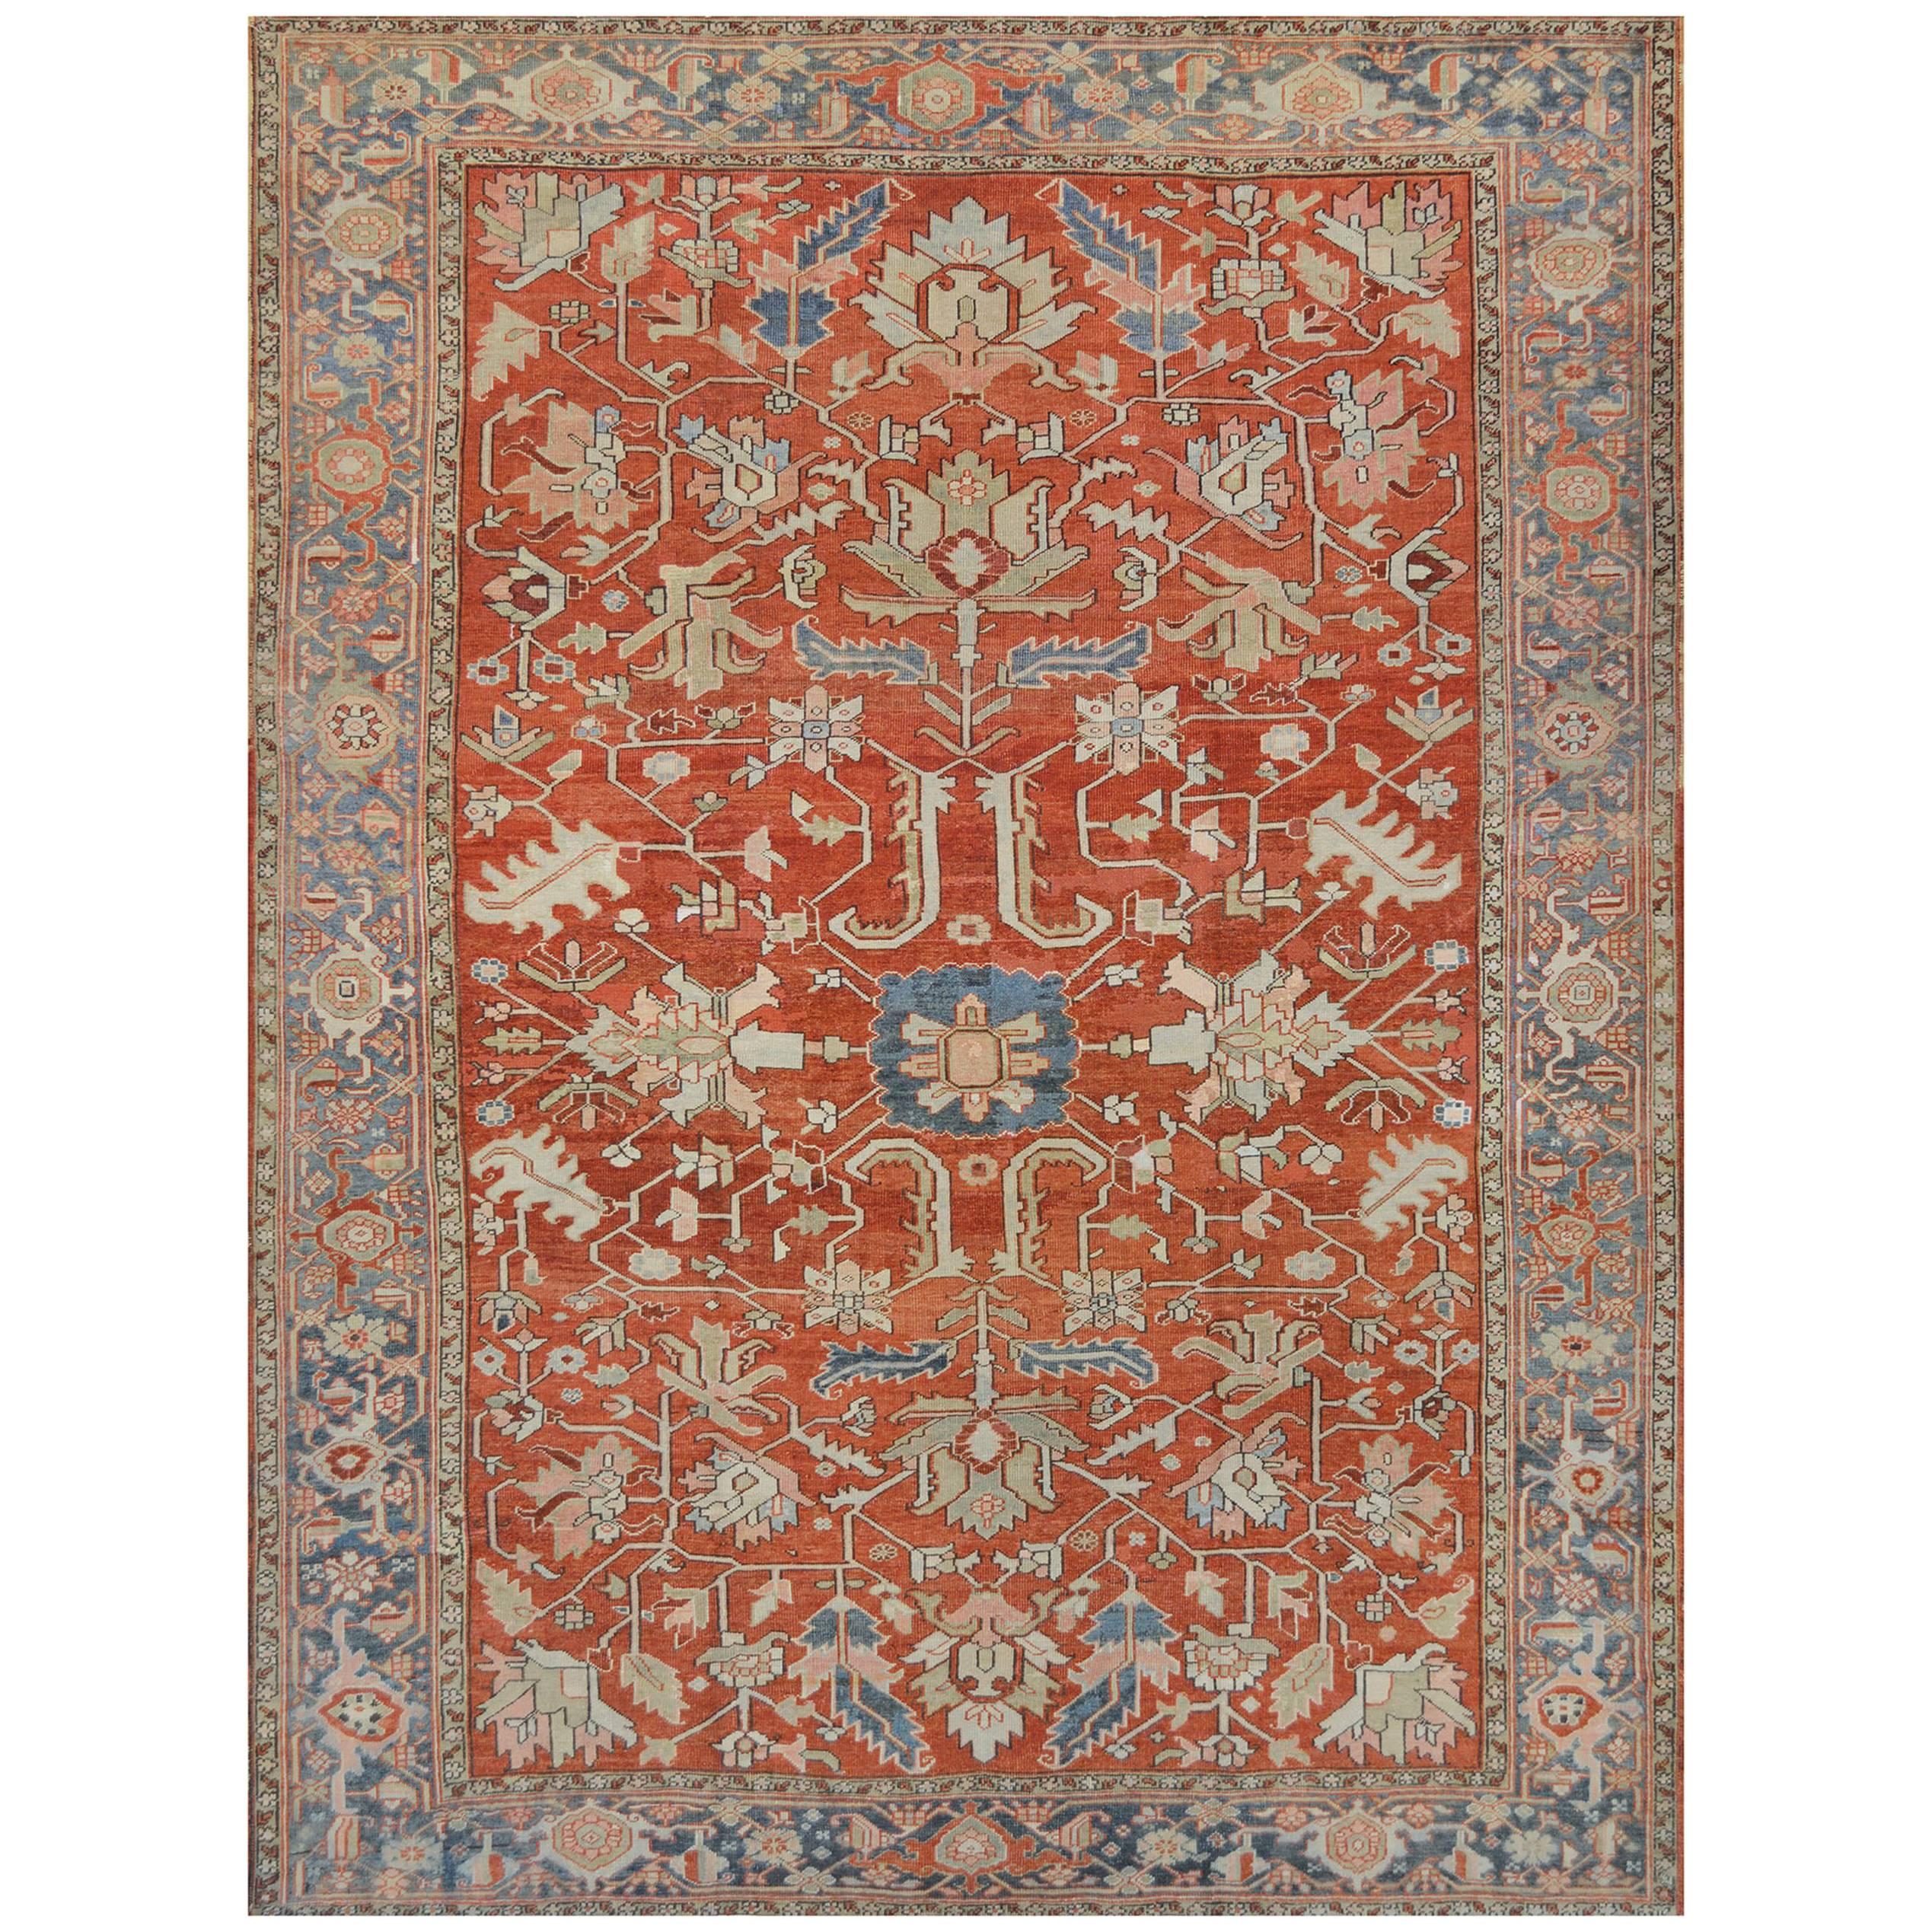 Late 19th Century Serapi Rug from North West Persia